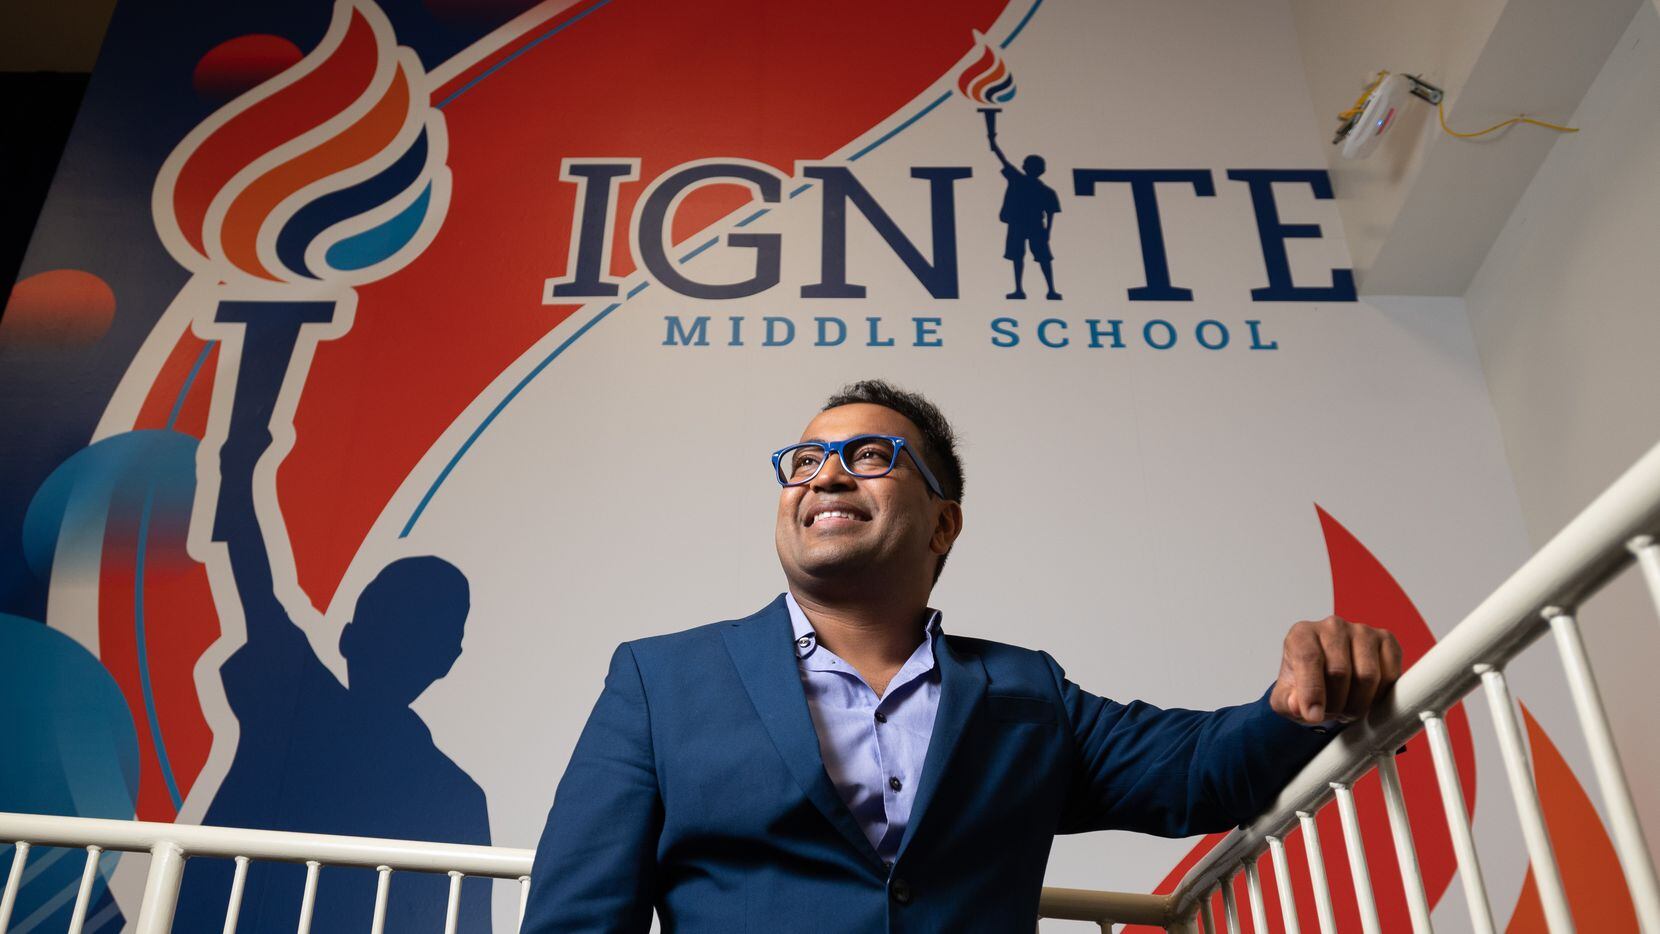 Ignite Middle School teacher Akash Patel was named one of TIME's 10 Innovative Teachers on...